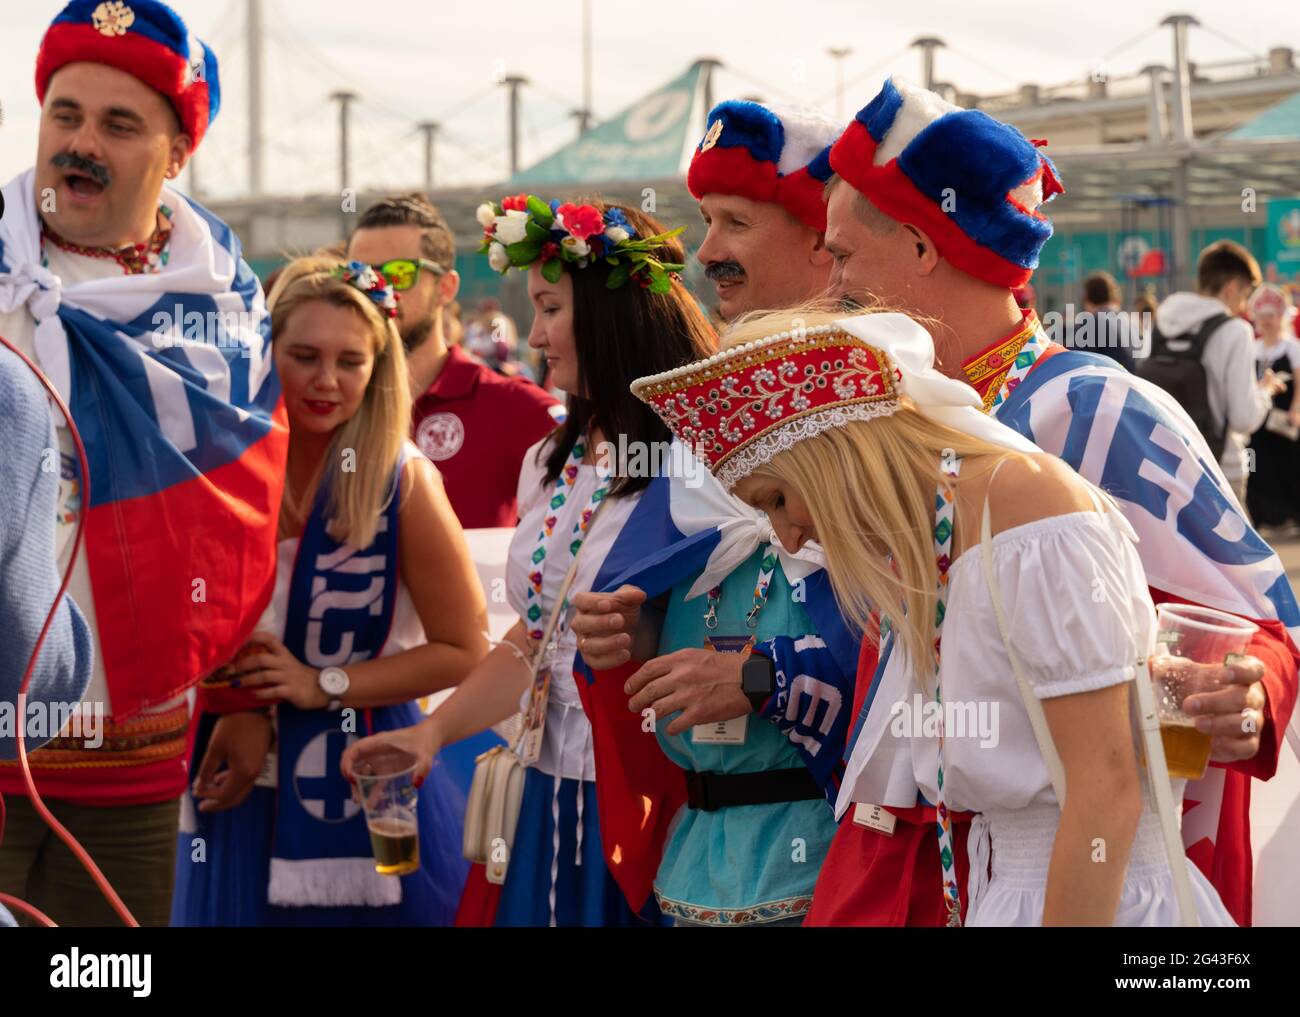 Russian soccer traditions' uniforms